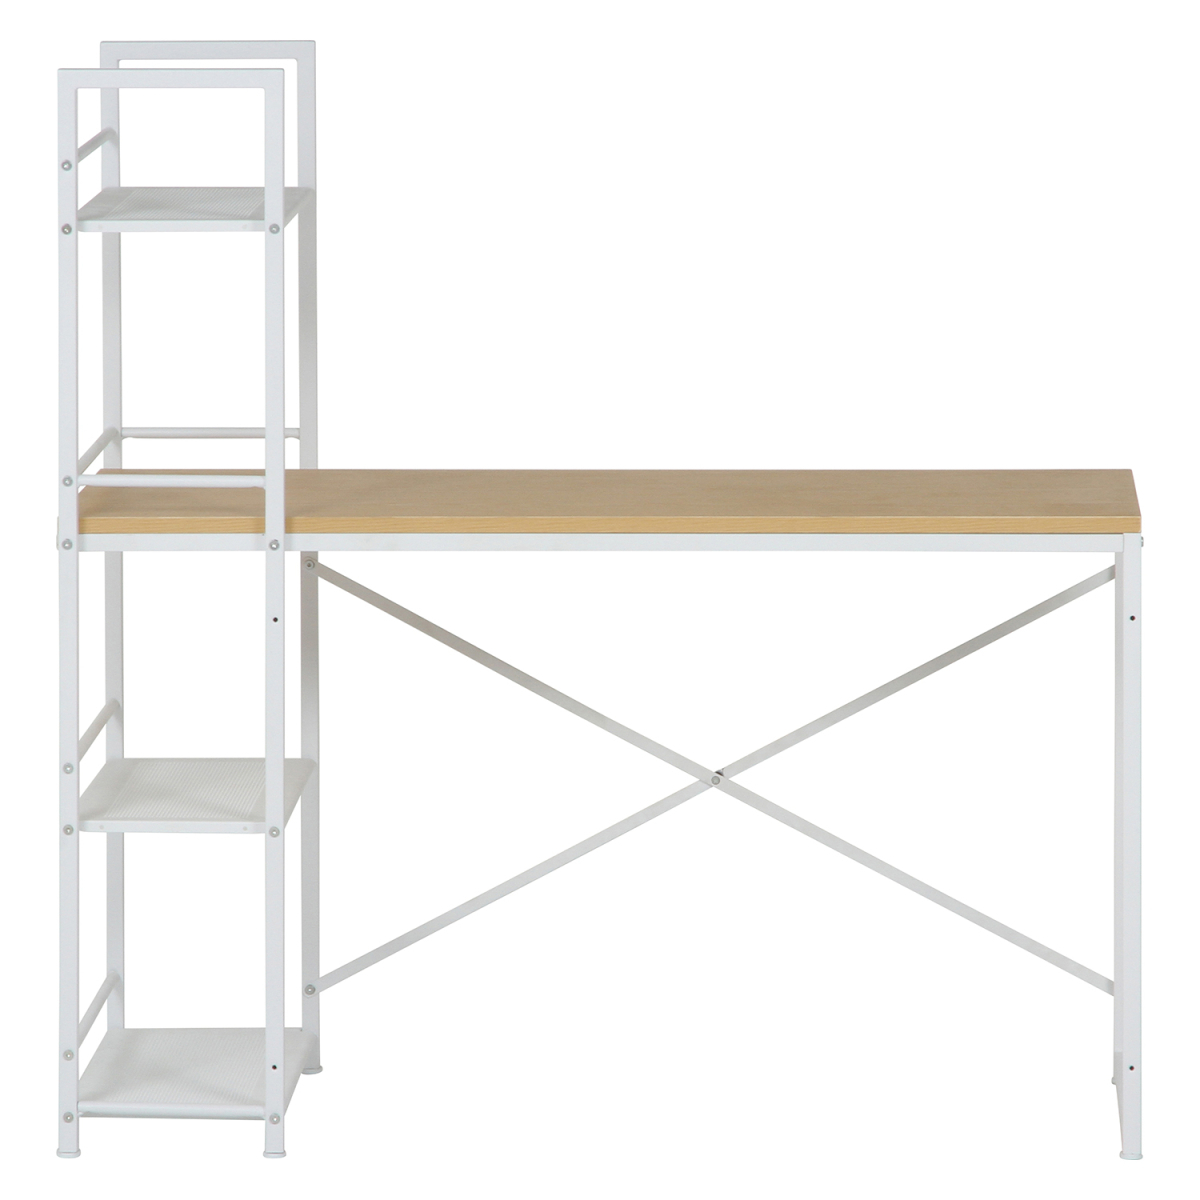  rack attaching Work desk width 120.5cm depth 49cm maple color [ new goods ][ free shipping ( one part region excepting )]